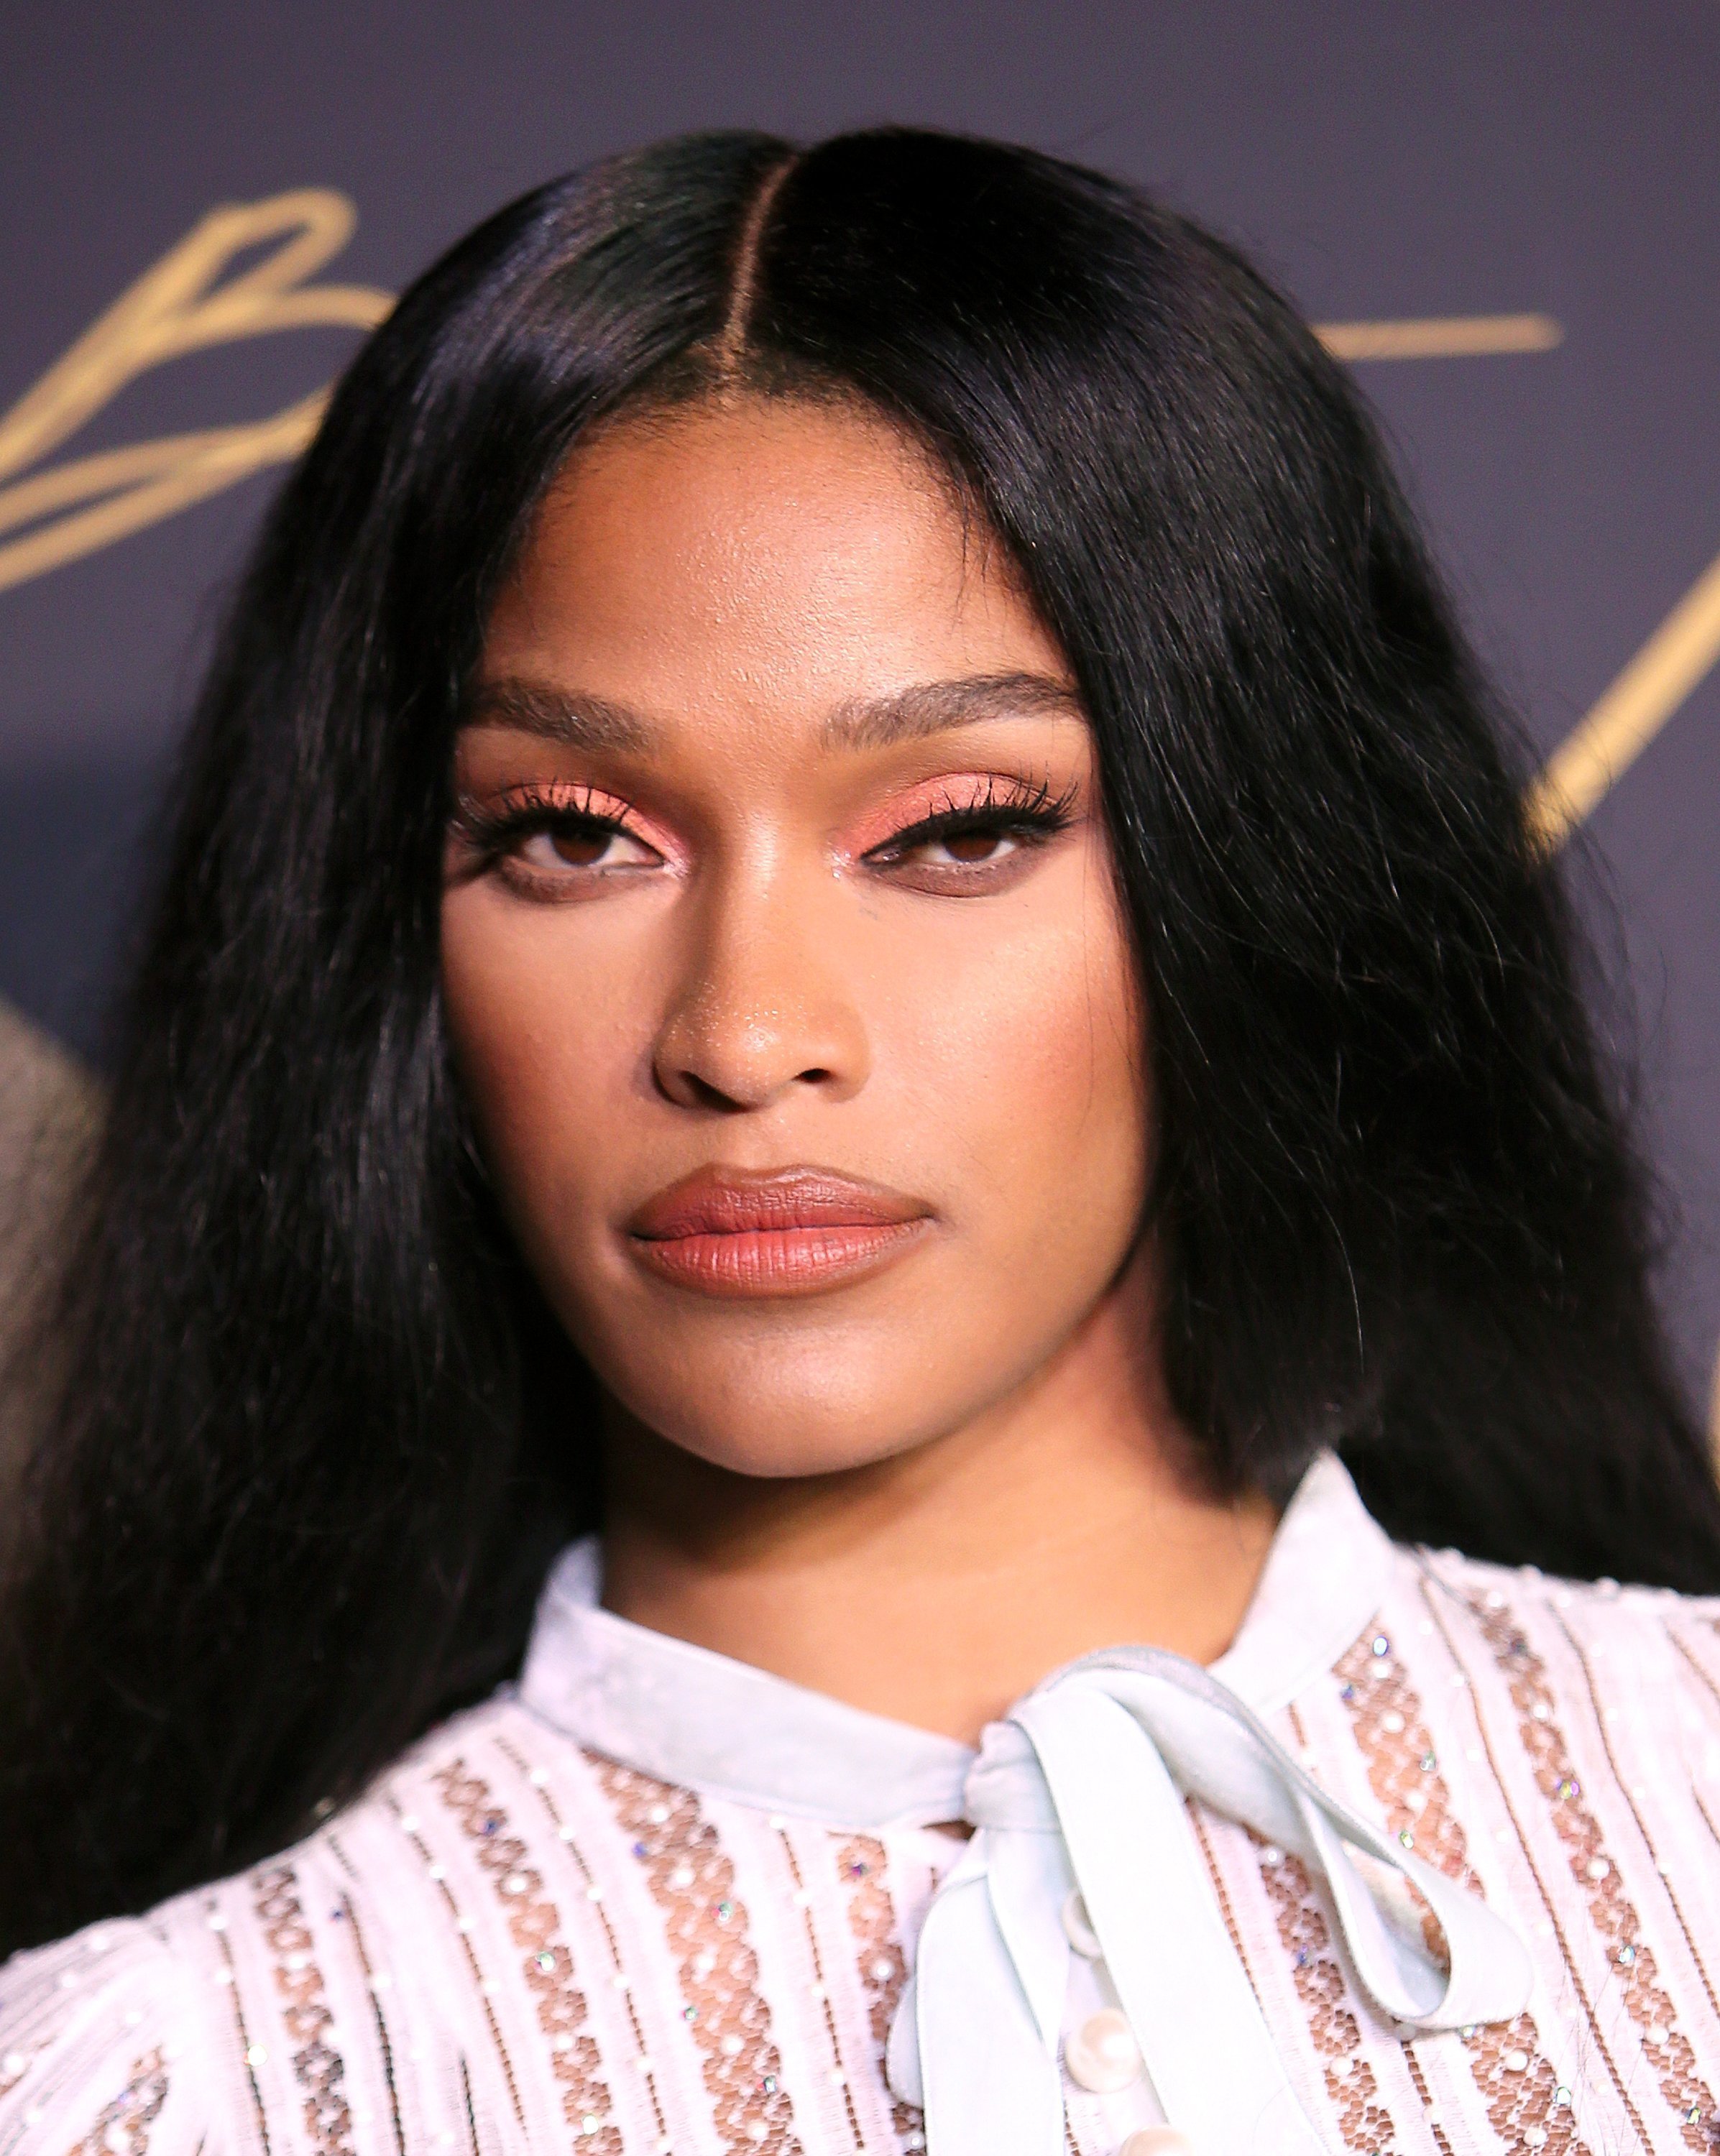 Joseline Hernandez at The MAXIM Hot 100 Party on June 24, 2017 in California | Photo: Getty Images